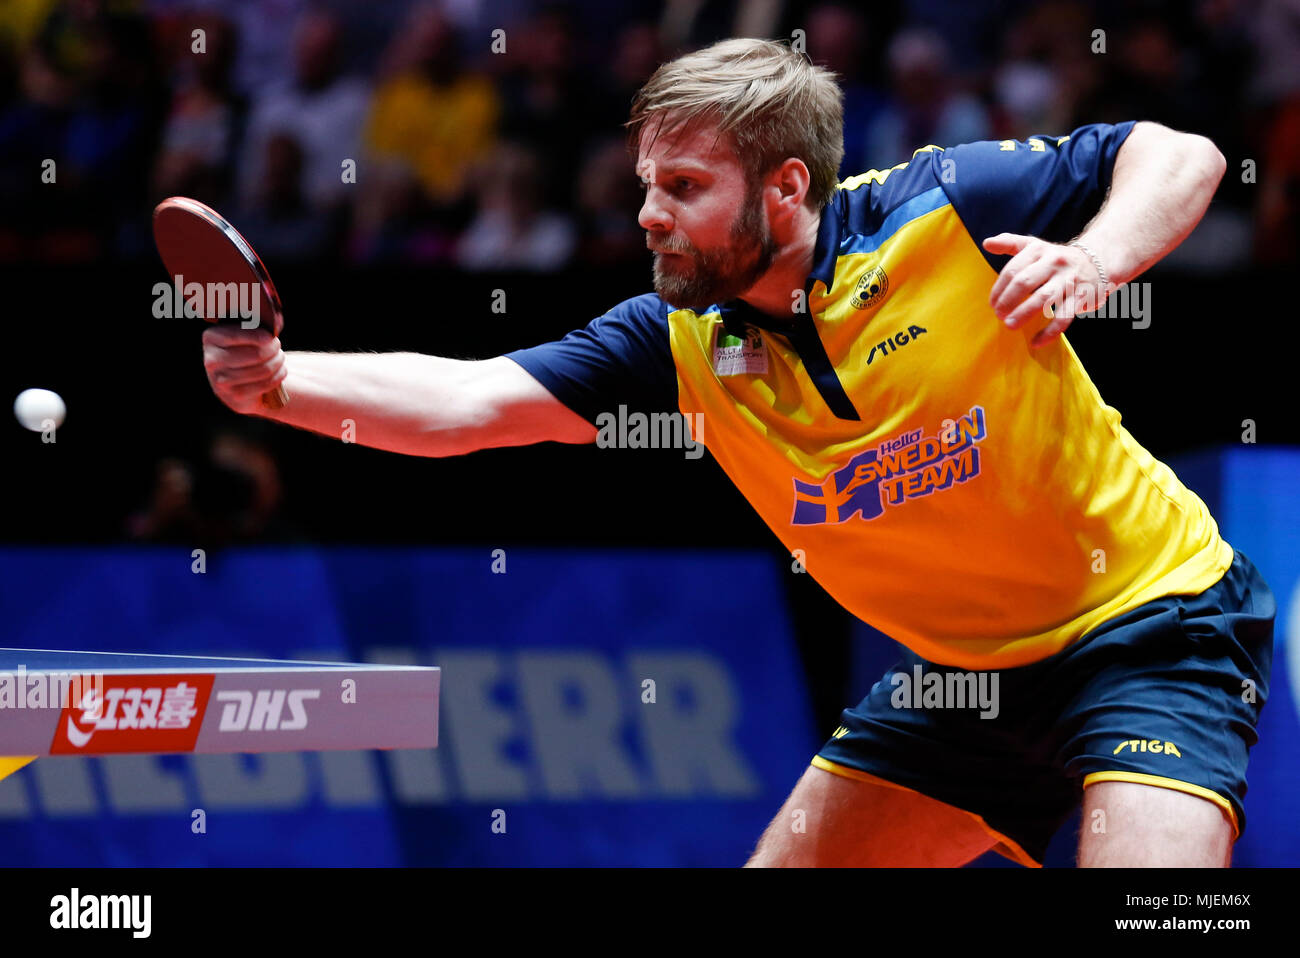 Halmstad, Sweden. 4th May, 2018. Jon Persson of Sweden returns the ball to  Samuel Walker of England during the Men's group quarterfinal match at the  2018 World Team Table Tennis Championships in